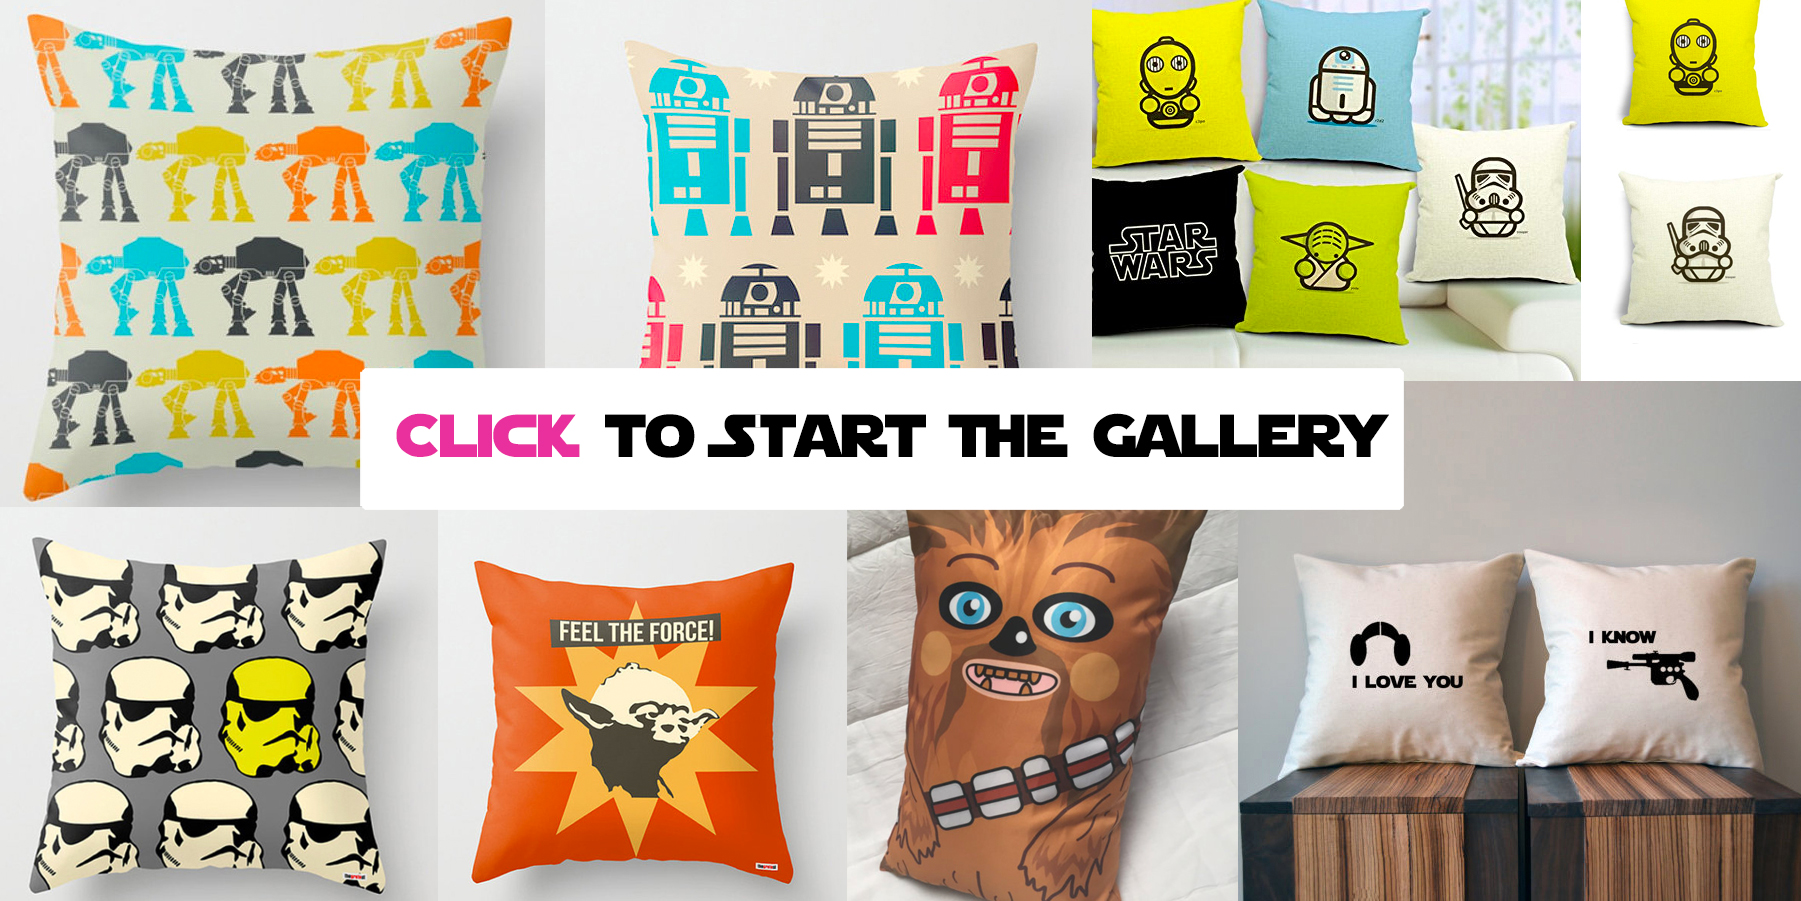 http://walyou.com/wp-content/uploads//2017/01/10-Cool-Star-Wars-Pillow-Covers-.jpg